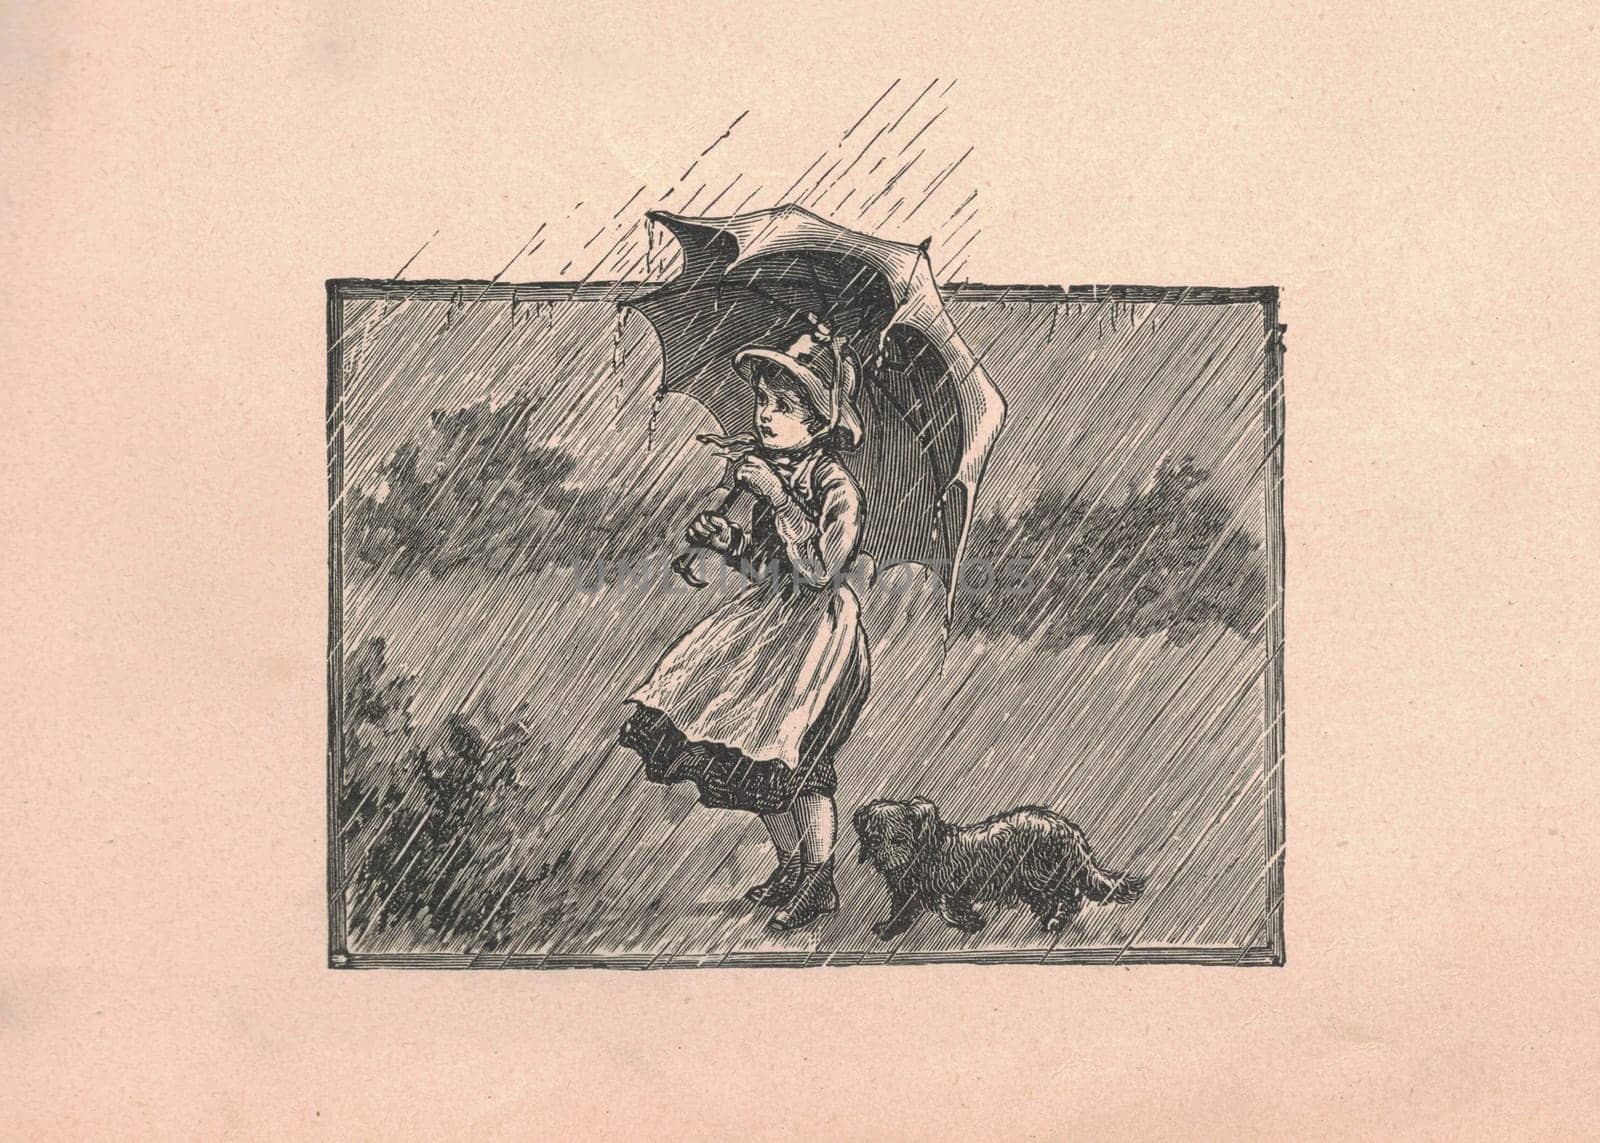 Black and white antique illustration shows a little girl holds umbrella in rainy time. Vintage drawing shows a little girl and dog in a rainy day. Old picture from fairy tale book. Storybook illustration published 1910. A fairy tale, fairytale, wonder tale, magic tale, fairy story or Marchen is an instance of folklore genre that takes the form of a short story. Such stories typically feature mythical entities such as dwarfs, dragons, elves, fairies and Peris, giants, Divs, gnomes, goblins, griffins, mermaids, talking animals, trolls, unicorns, or witches, and usually magic or enchantments.